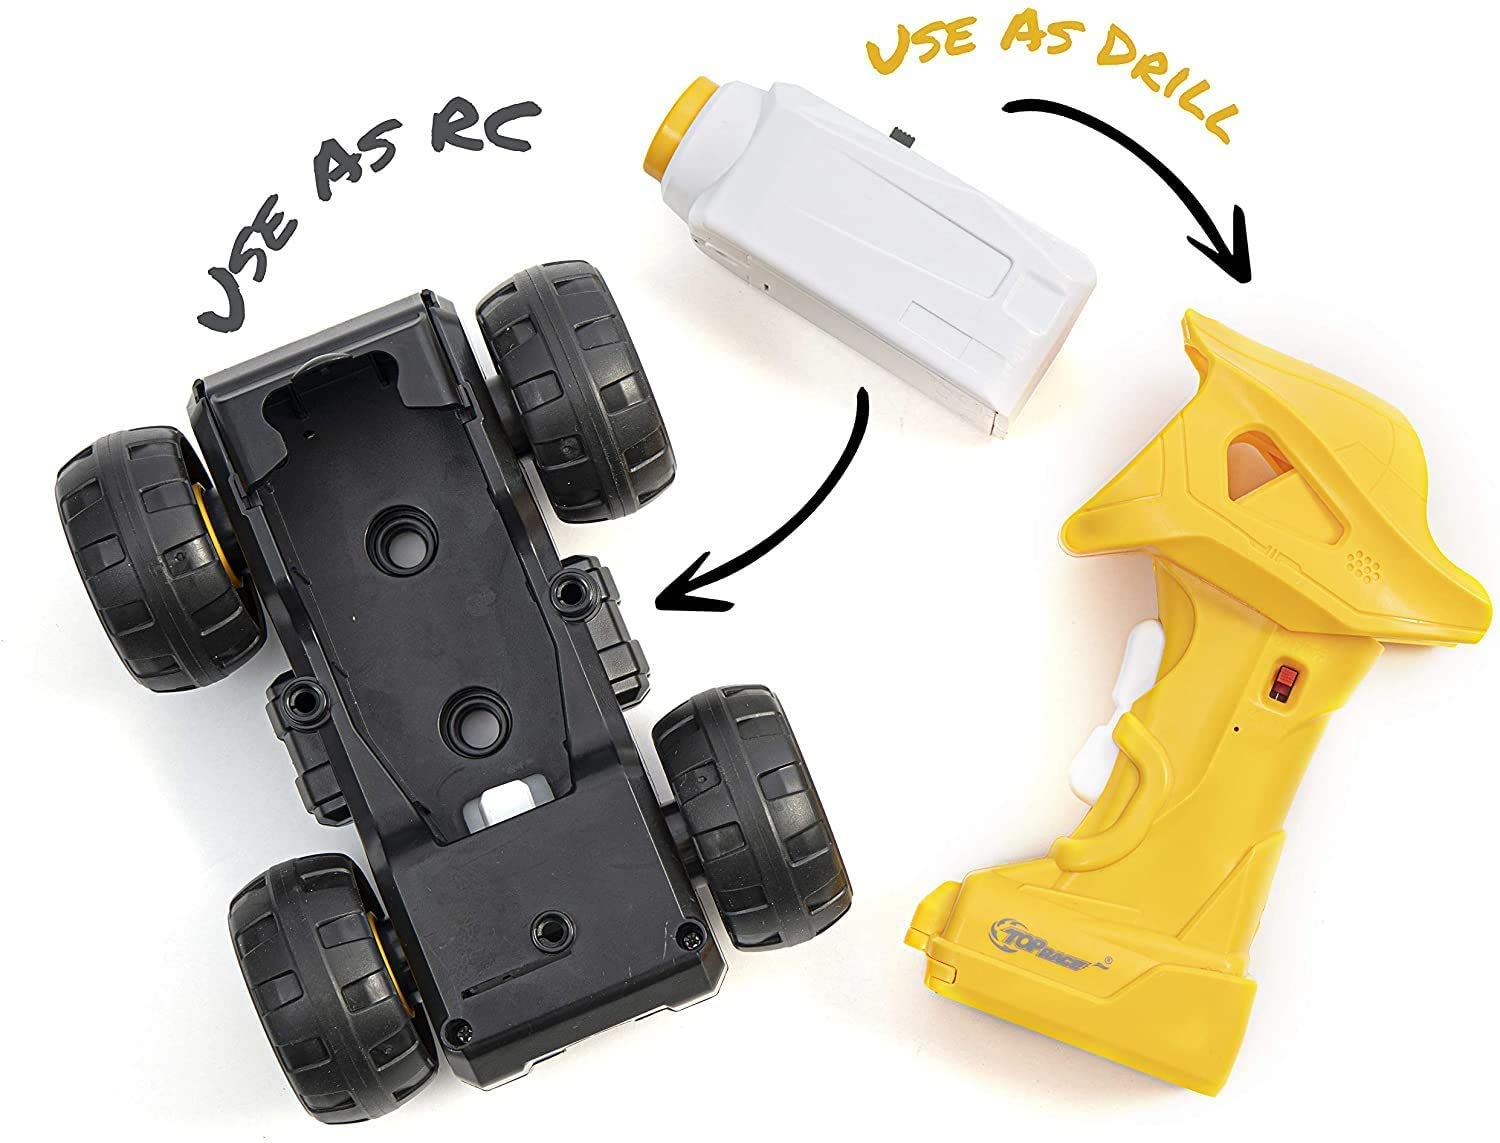 Take Apart Toys with Electric Drill | Converts to Remote Control Car | 3 in one Construction Truck Take Apart Toy for Boys | Gift Toys for Boys 3,4,5,6,7 Year Olds | Kids Stem Building Toy